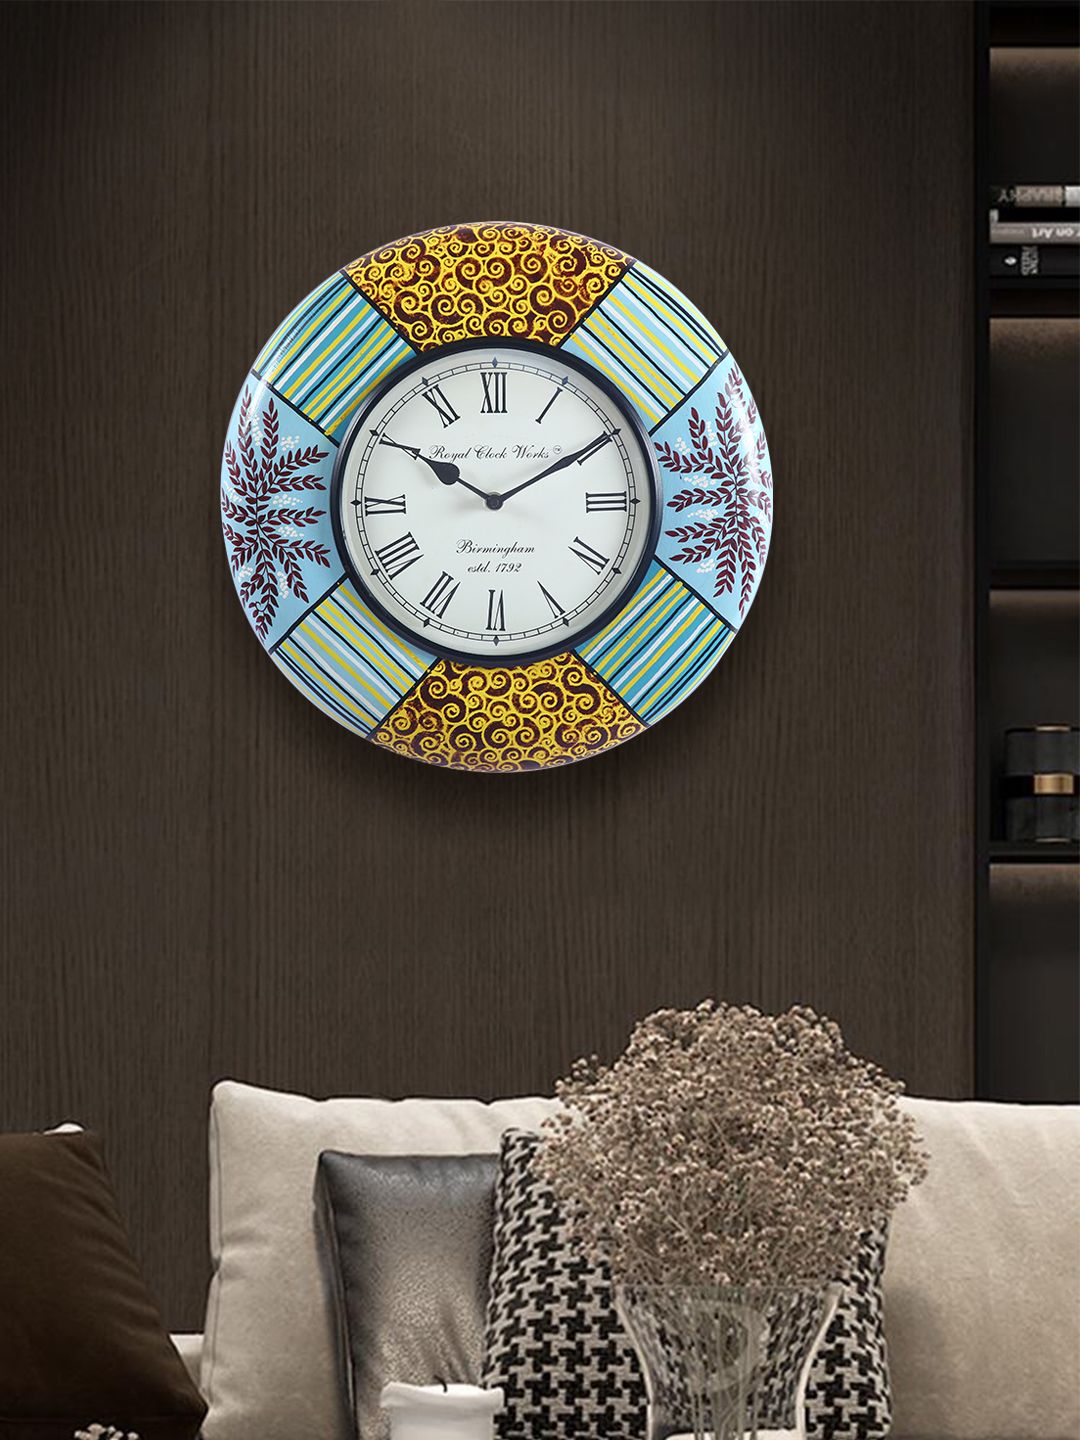 Aapno Rajasthan Blue & Yellow Printed Contemporary Wall Clock Price in India